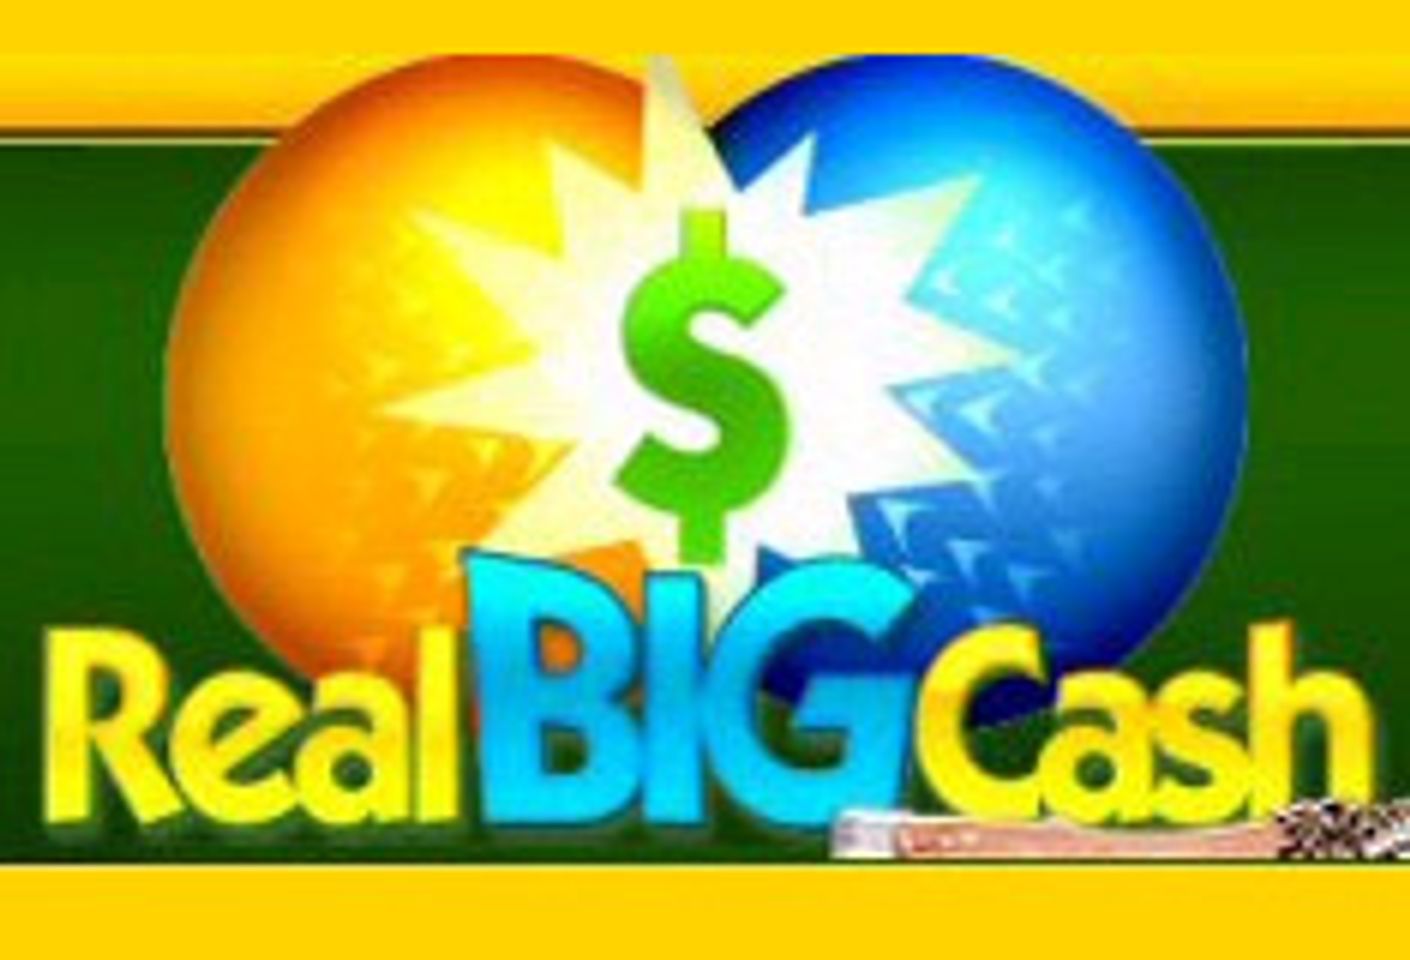 RealBigCash.com Now Offers ePassporte and Free Golf at Internext